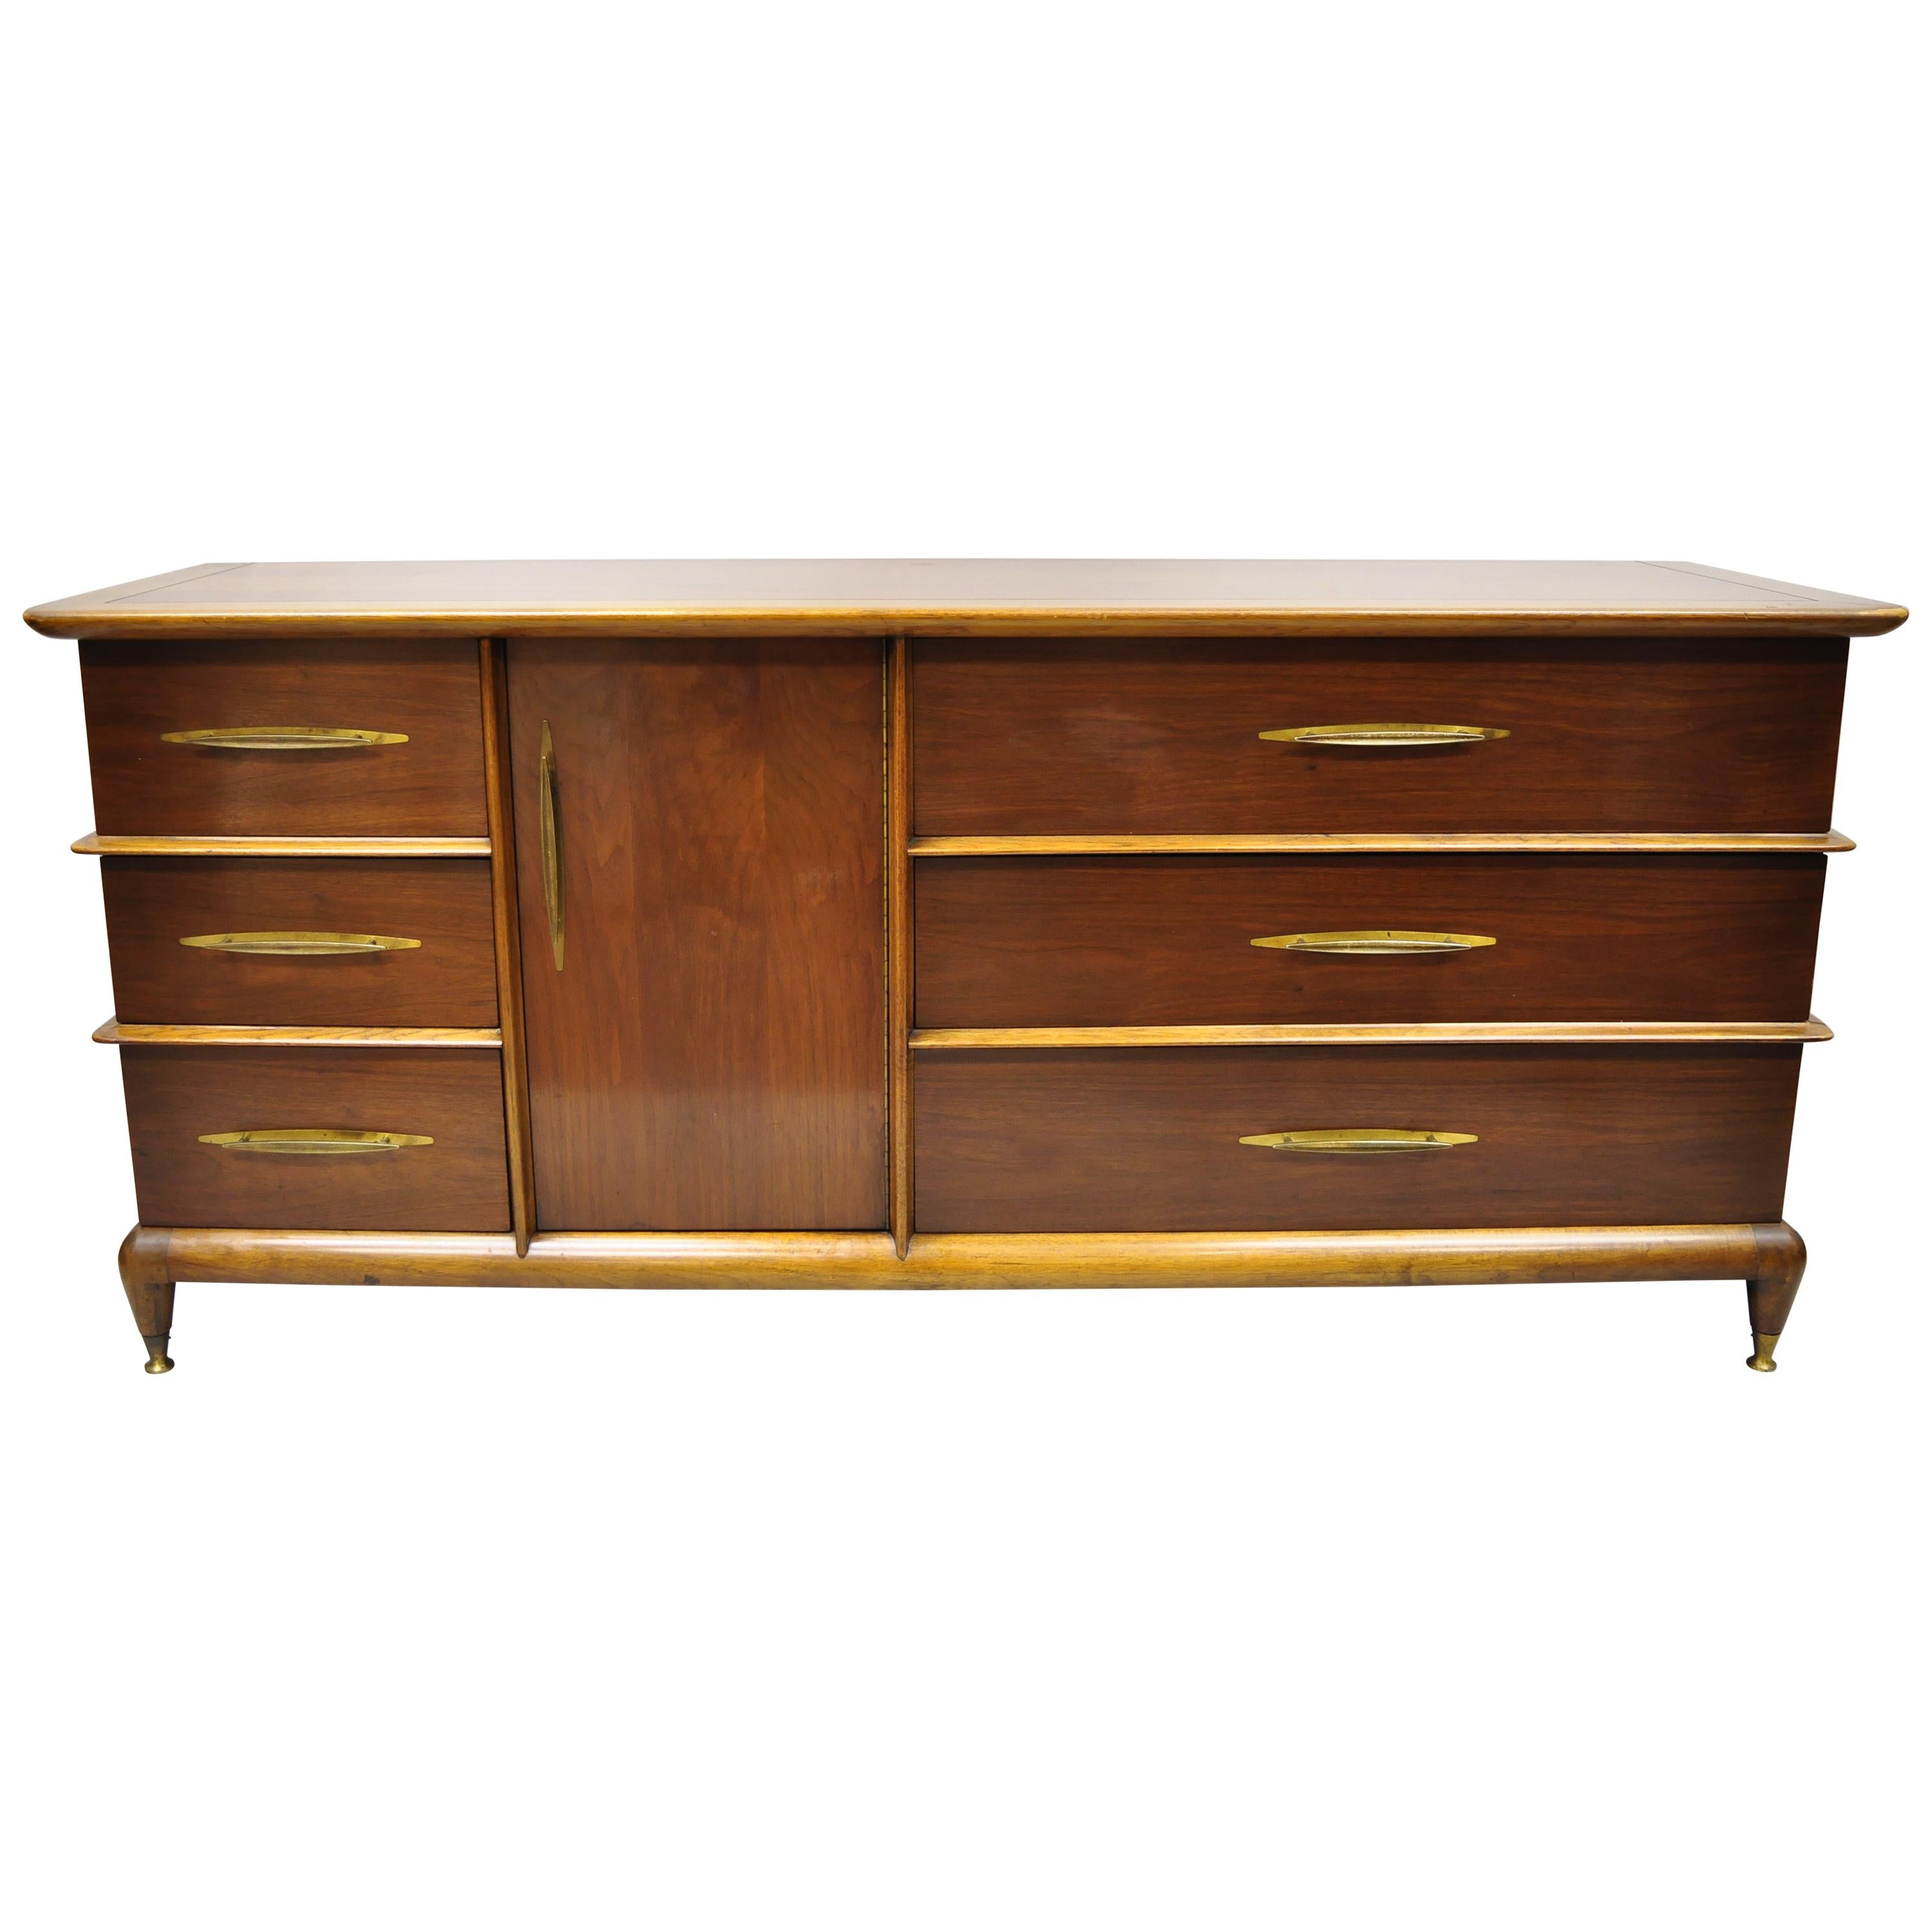 Kent Coffey The Appointment Midcentury Sculpted Walnut Credenza Cabinet Dresser